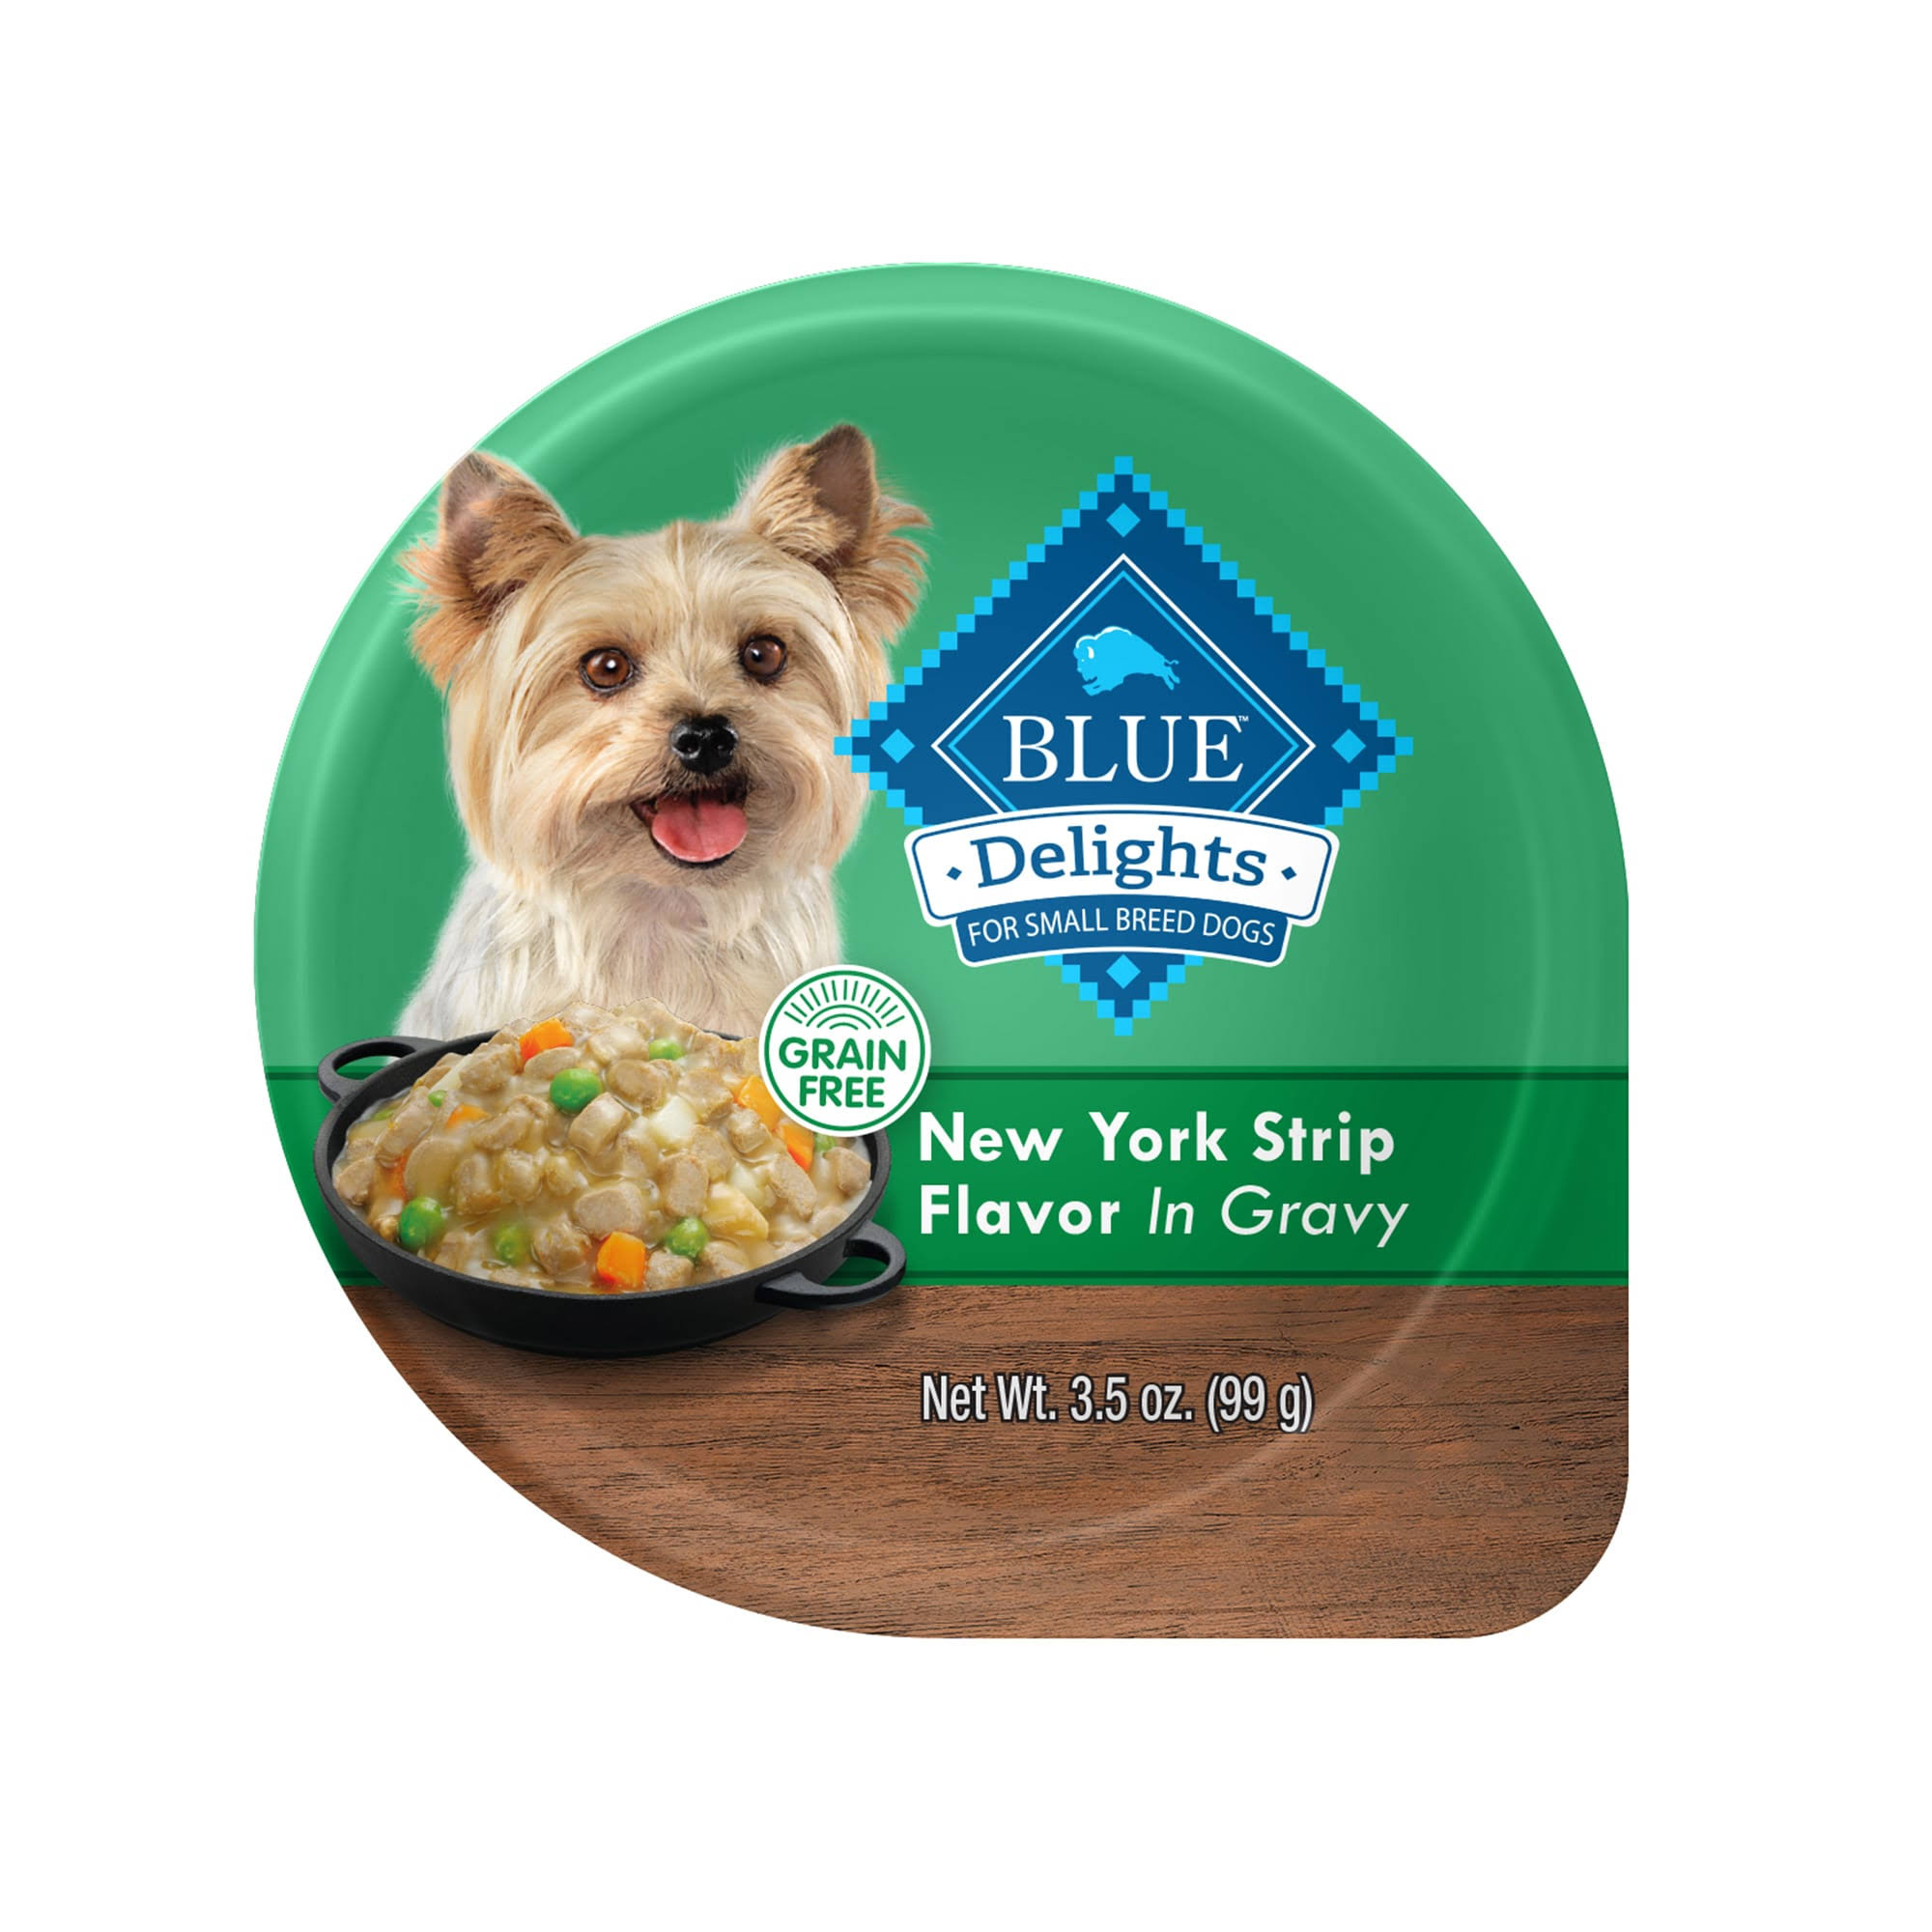 Blue Buffalo Blue Delights Dog Food, Grain Free, New York Strip Flavor In Gravy, For Small Breed Dogs - 3.5 oz